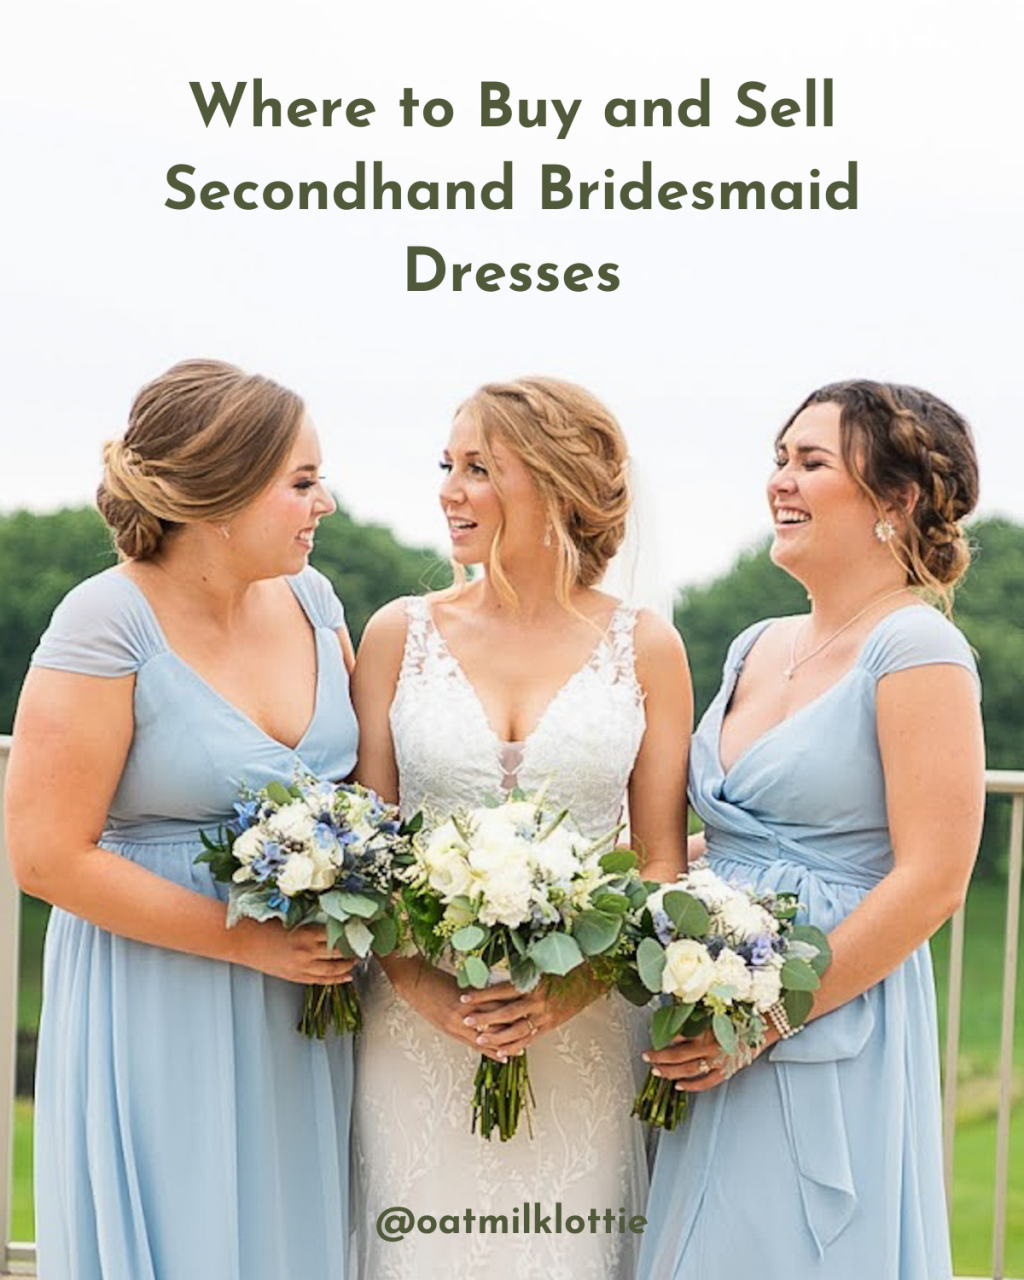 Where to Buy and Sell Used Bridesmaid Dresses